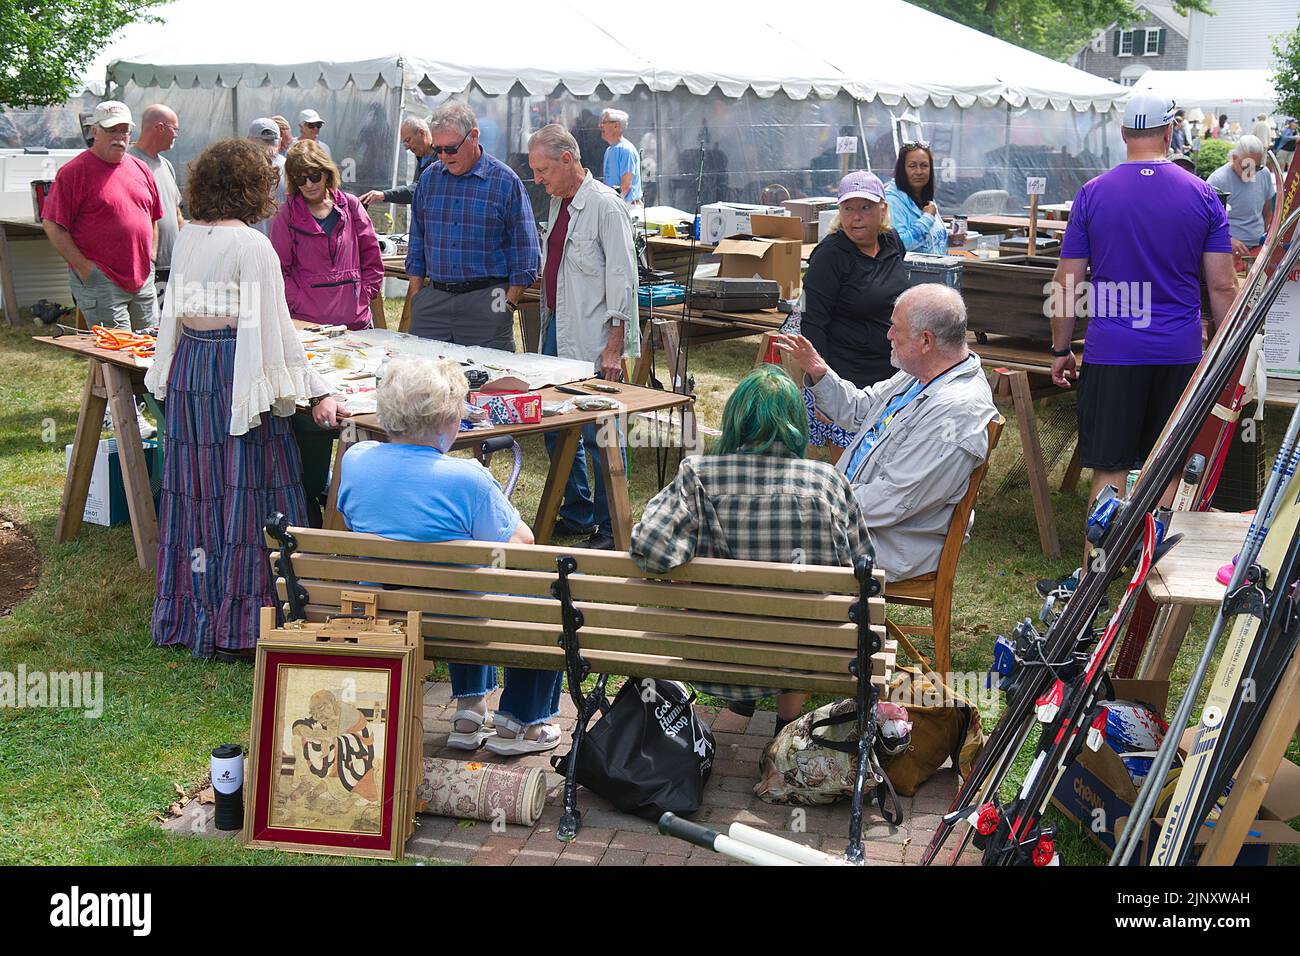 Overview of a church flea market in Dennis, Massachusetts on Cape Cod Stock Photo